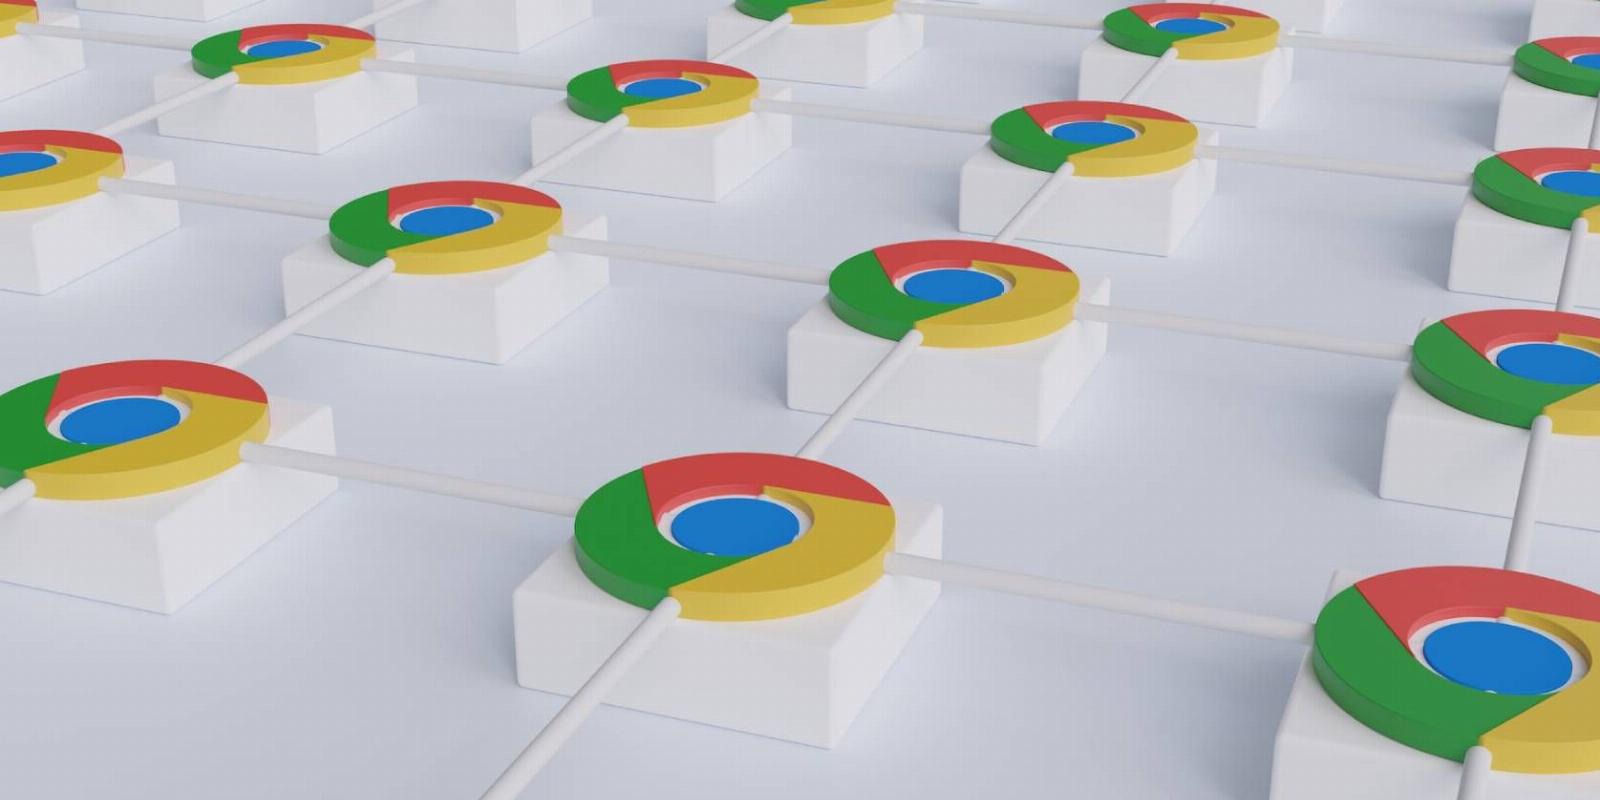 5 More Chrome Extensions to Manage the ‘Too Many Tabs’ Problem